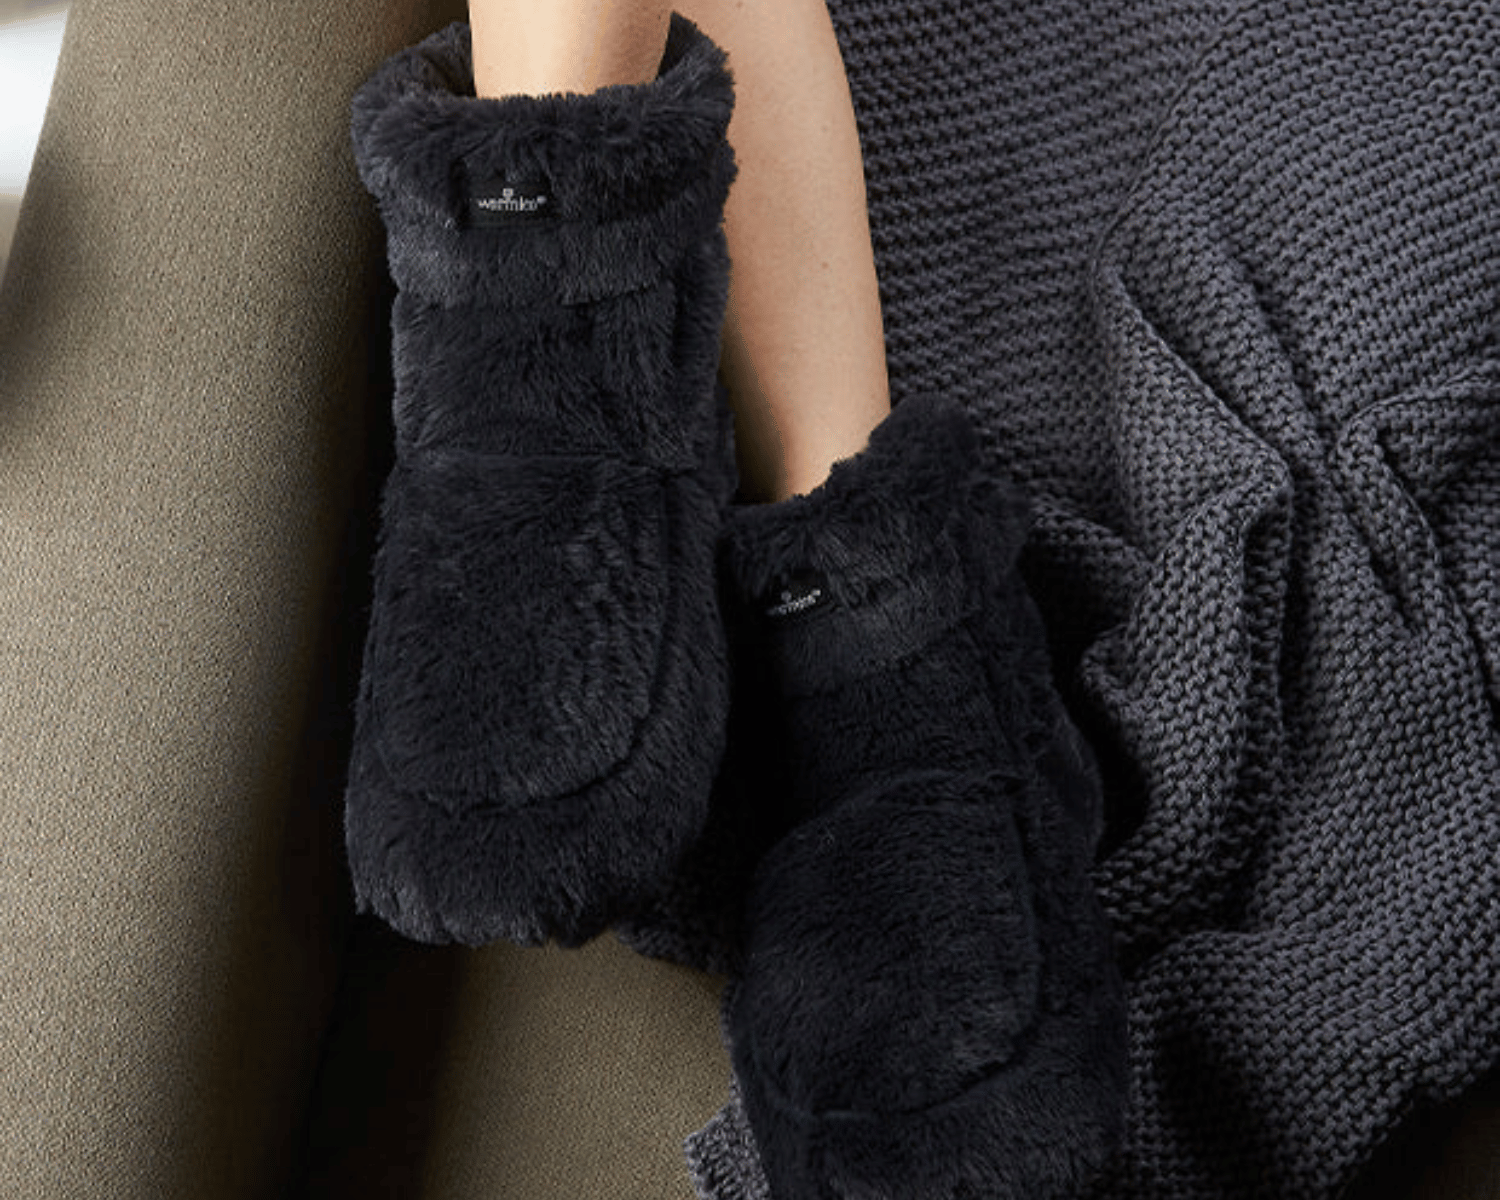 Should You Squeeze The Air Out of A Hot Water Bottle?